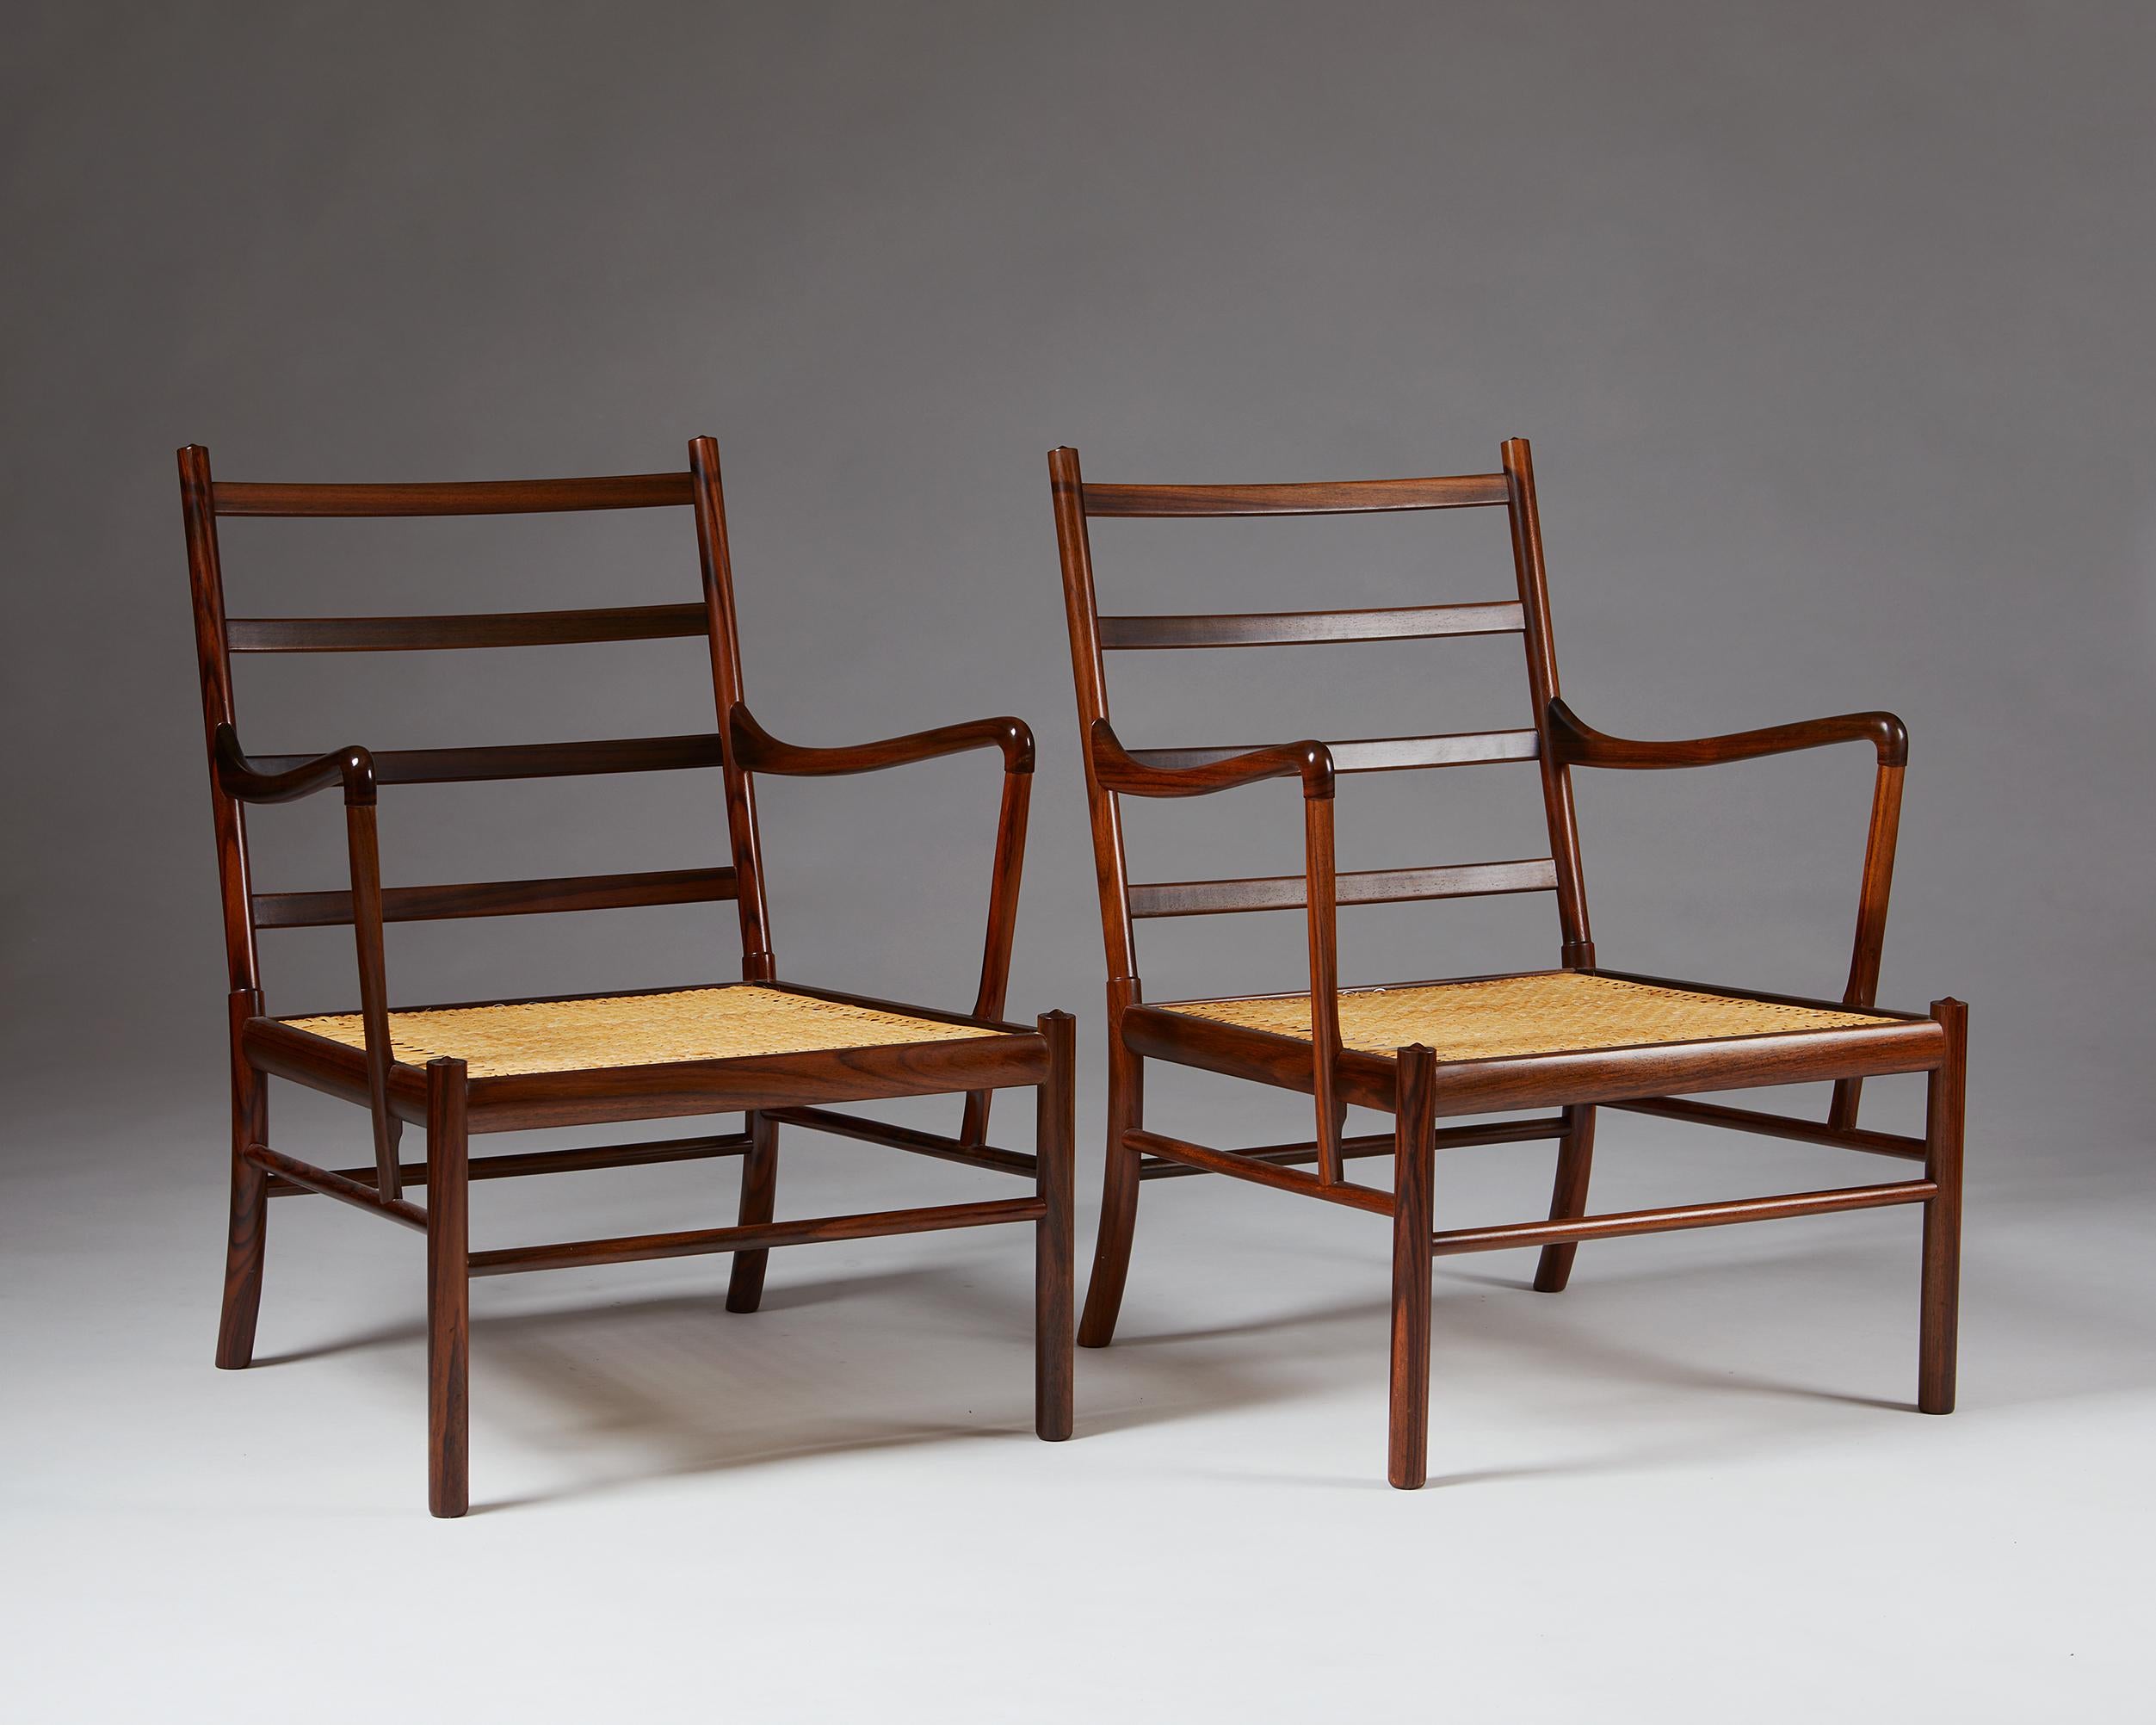 Mid-20th Century Pair of Armchairs, PJ 149, “Colonial”, Designed by Ole Wanscher for P. Jeppesen